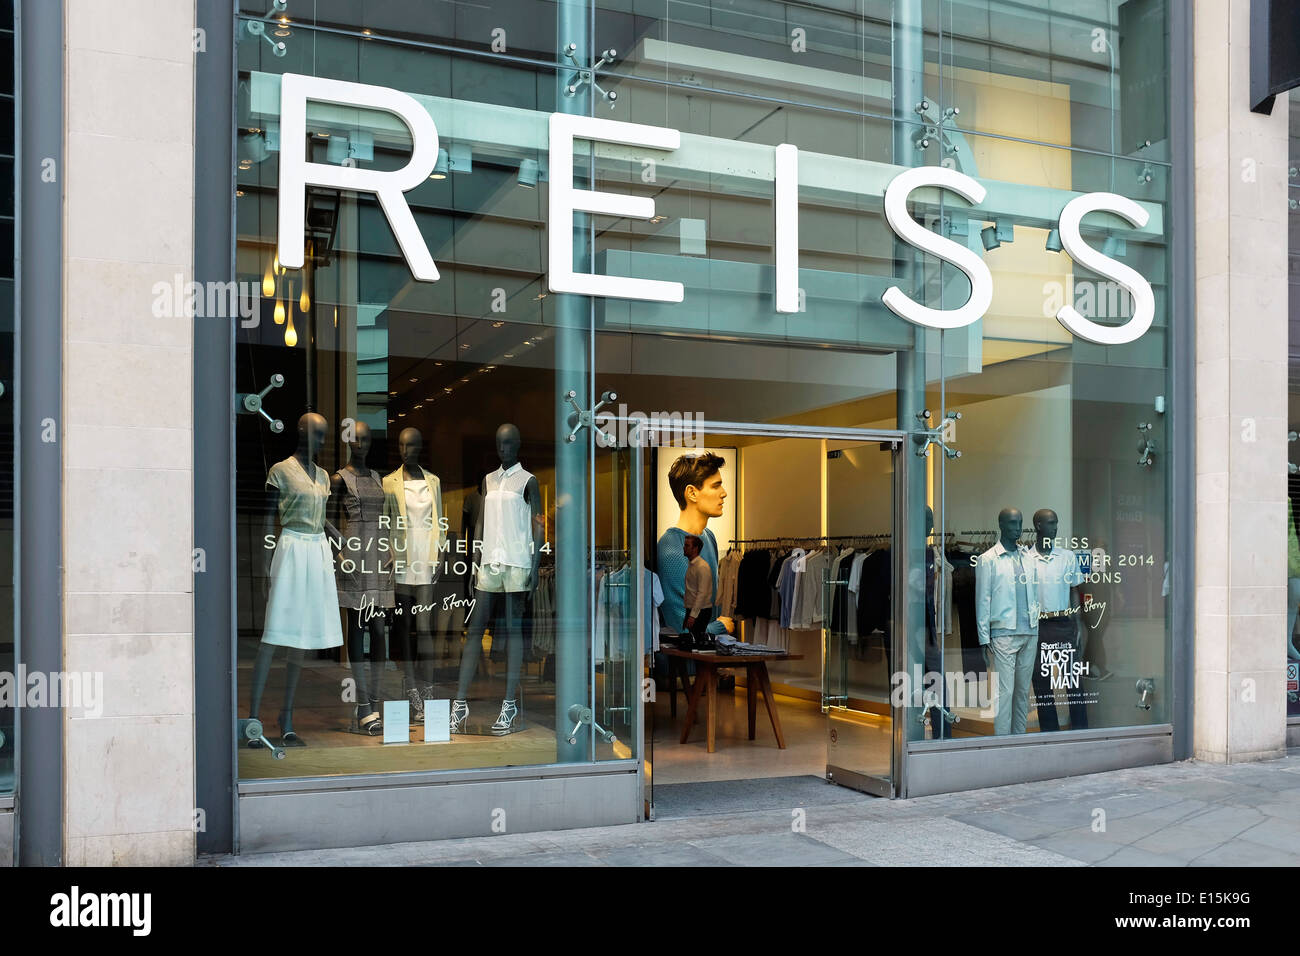 Reiss store front in Manchester city centre UK Stock Photo